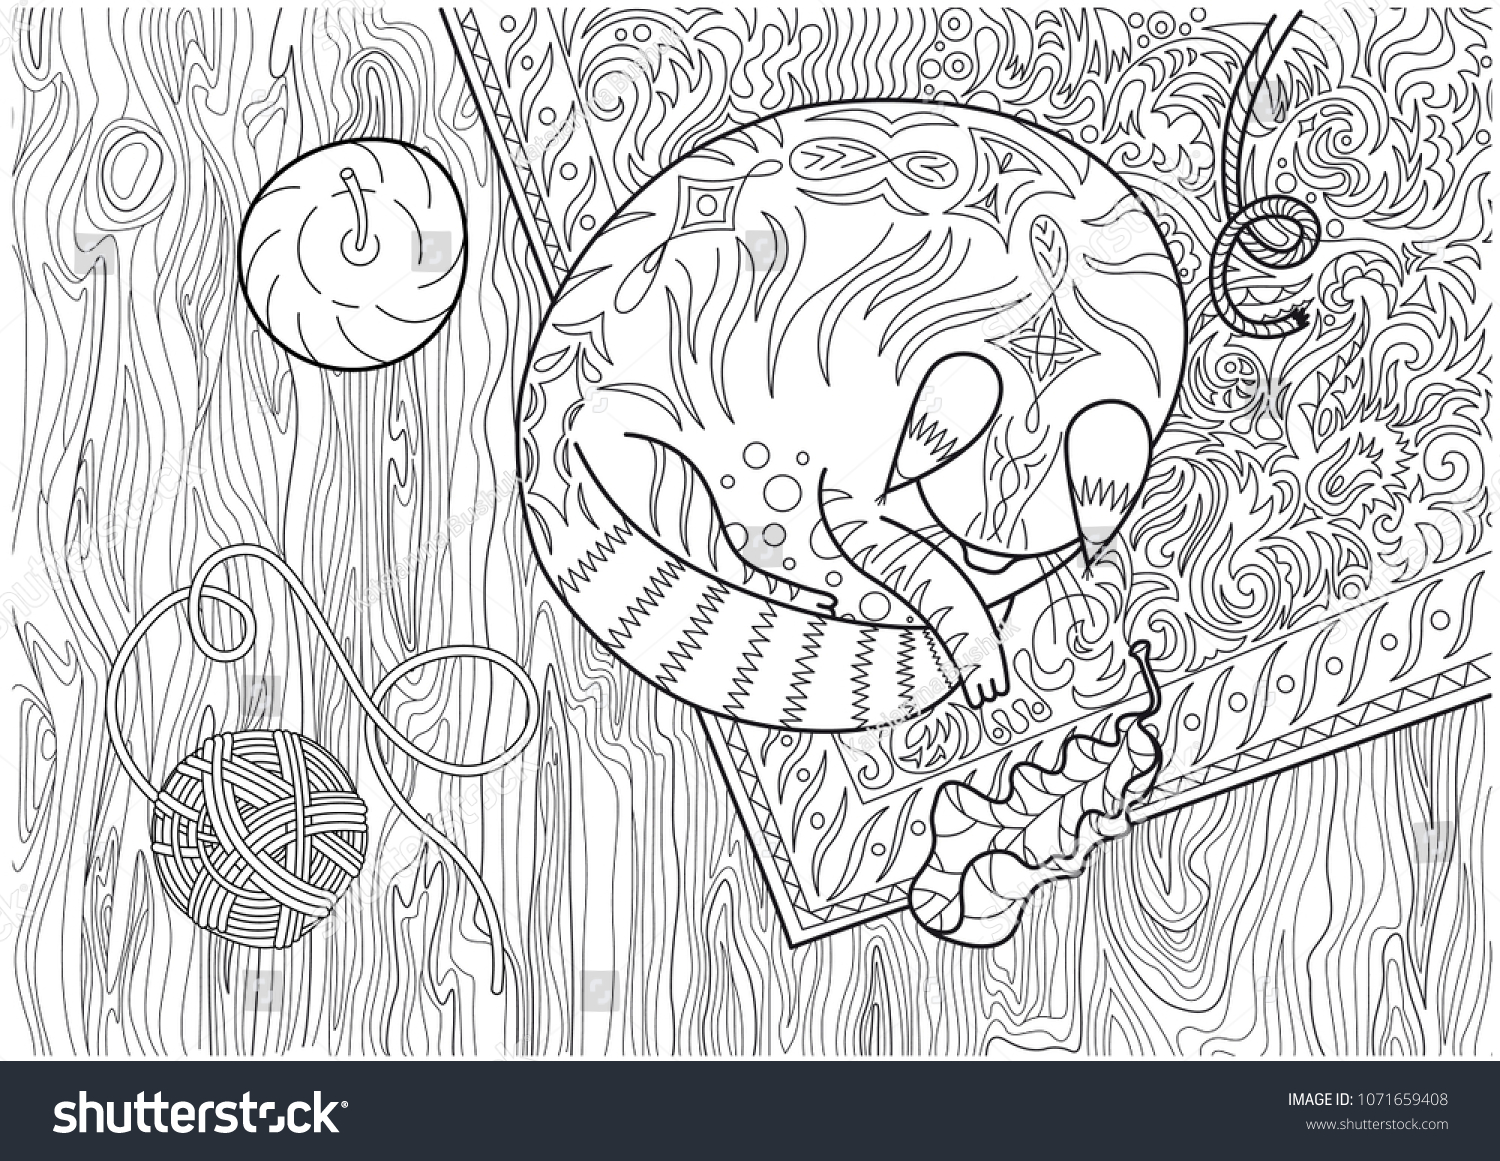 sleeping-cat-coloring-page-stock-vector-royalty-free-1071659408